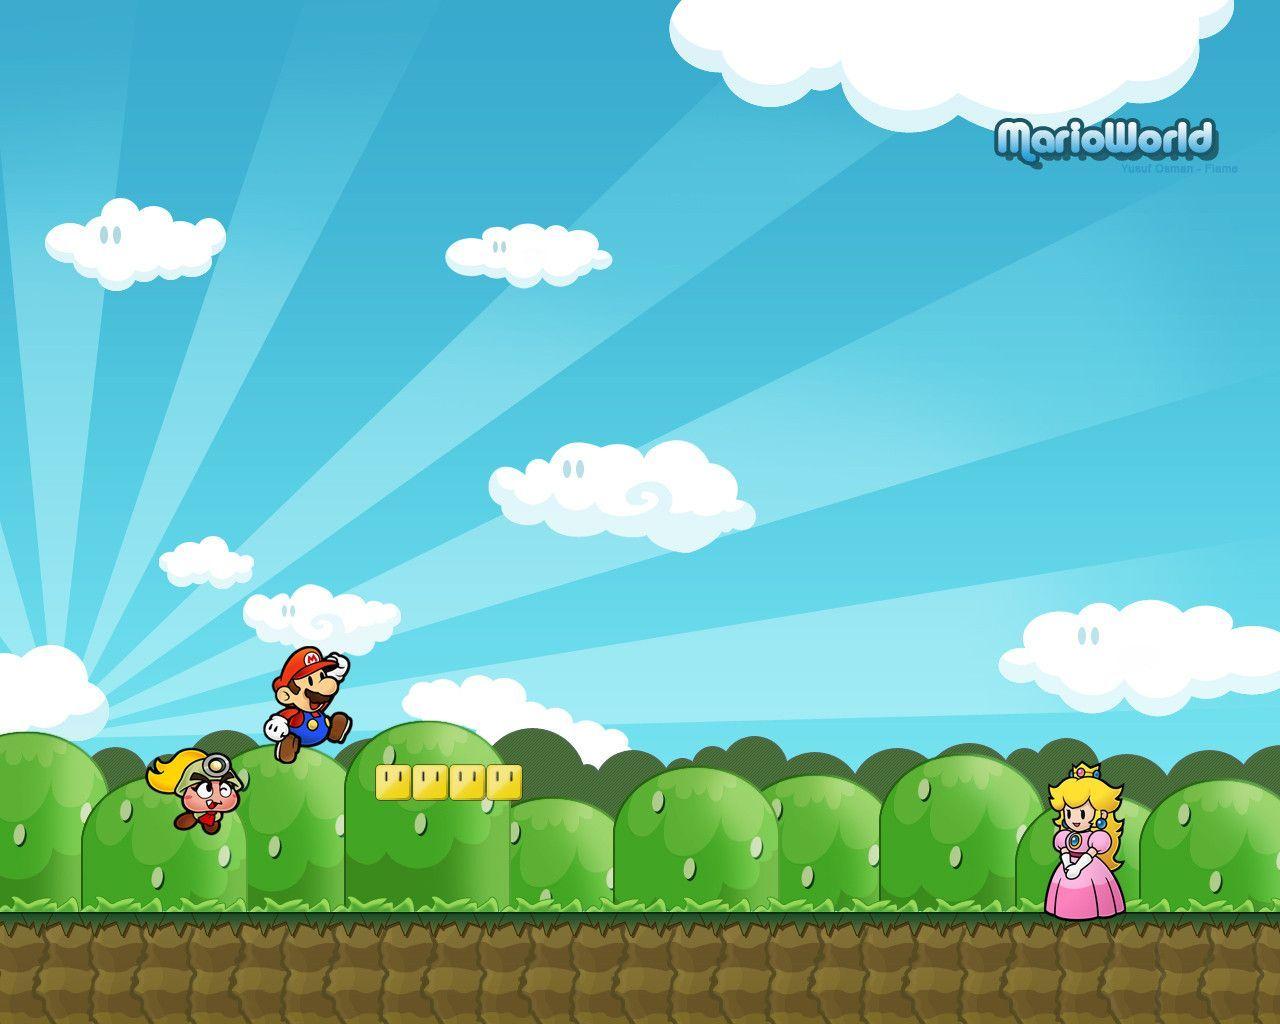 Super Mario Themes, Wallpaper, and Backgrounds